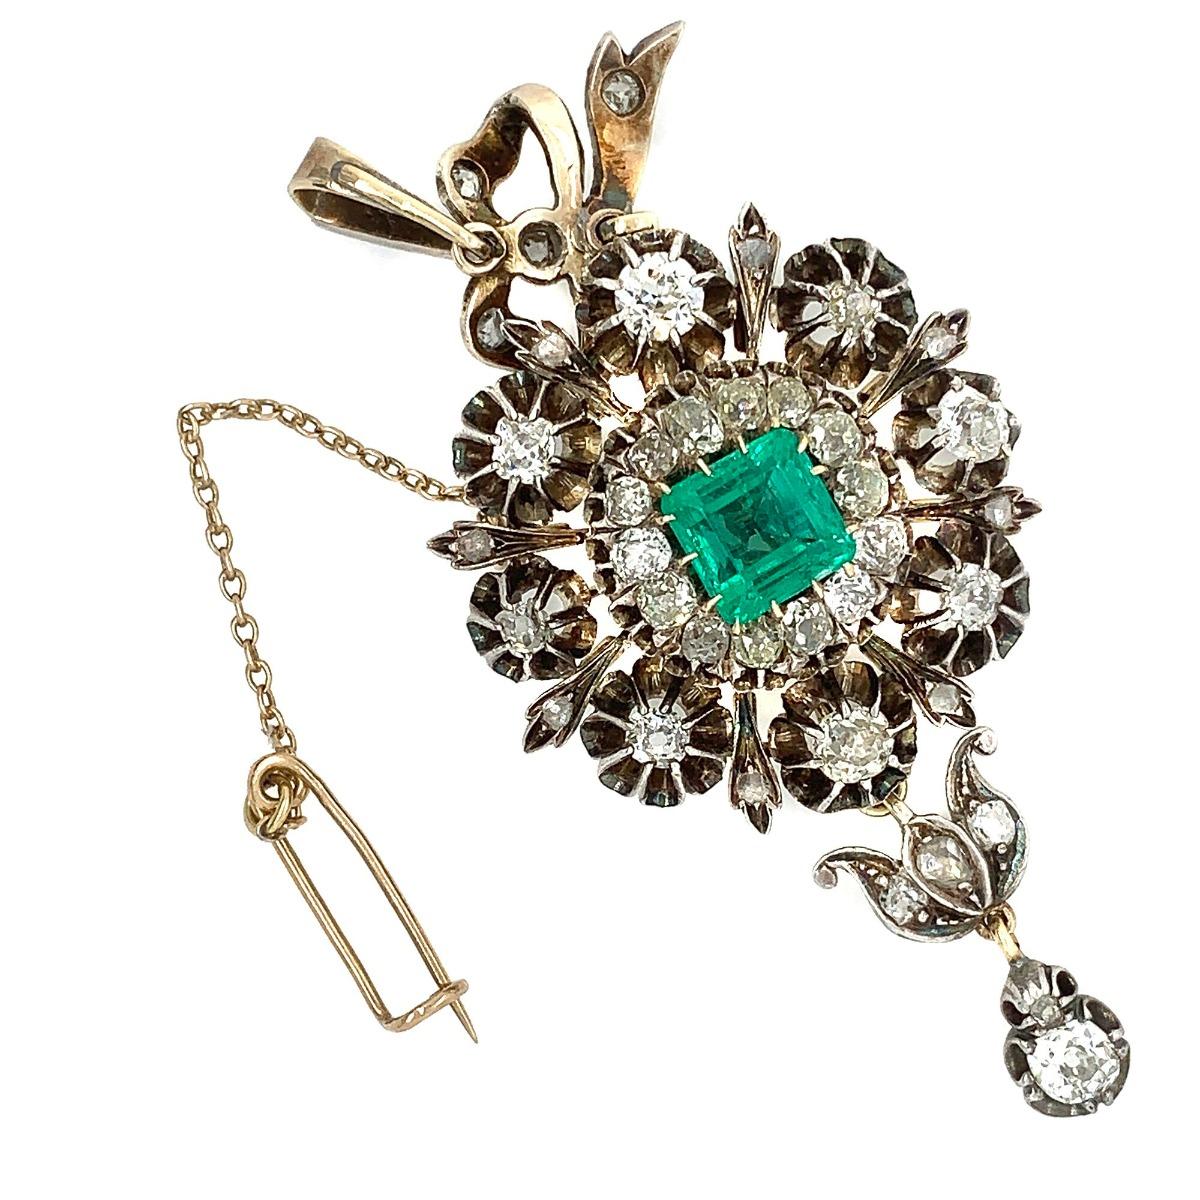 Period: Edwardian
Metal: Silver & Gold 
Condition: Excellent
Gemstone: Diamond & Emerald
Total Diamond Weight: 4 CT
Square Cut Emerald Weight: 3 CT
Item Weight: 21.5 grams
Length: 2.8 inch
Width: 1.3 inch